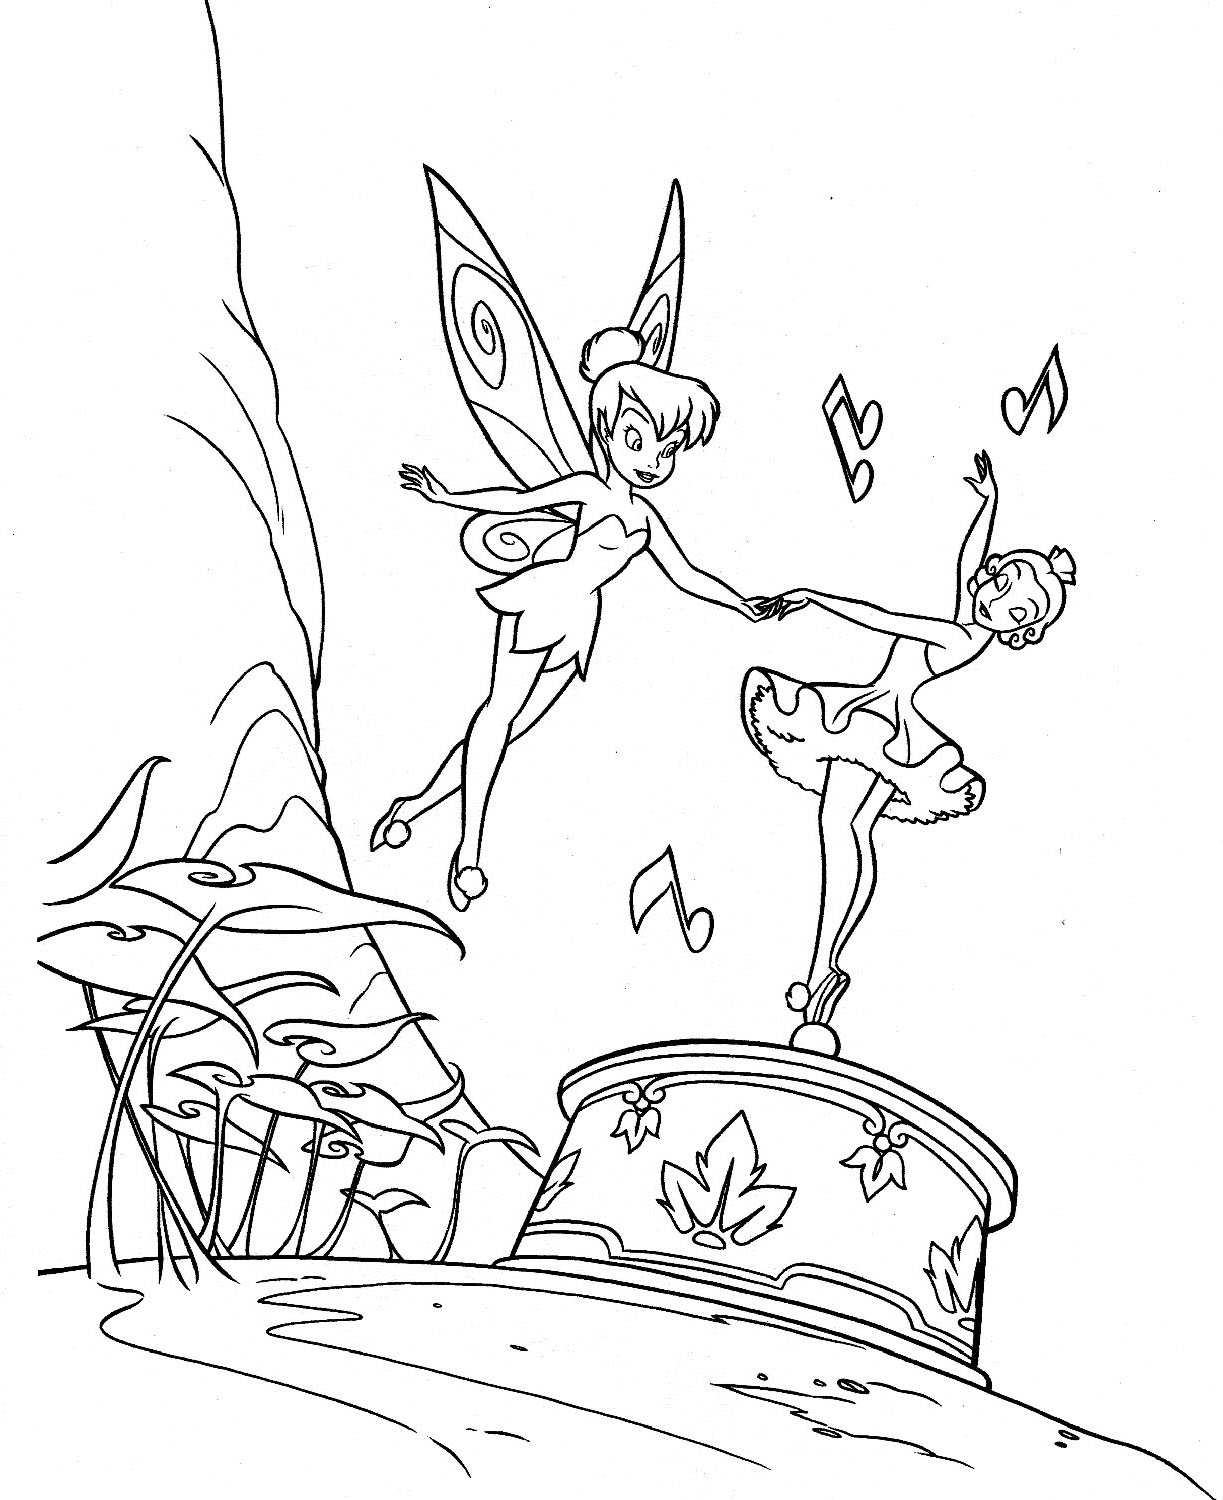 Tinkerbell Coloring Pages Singing and Dancing with a Atatue of Princess